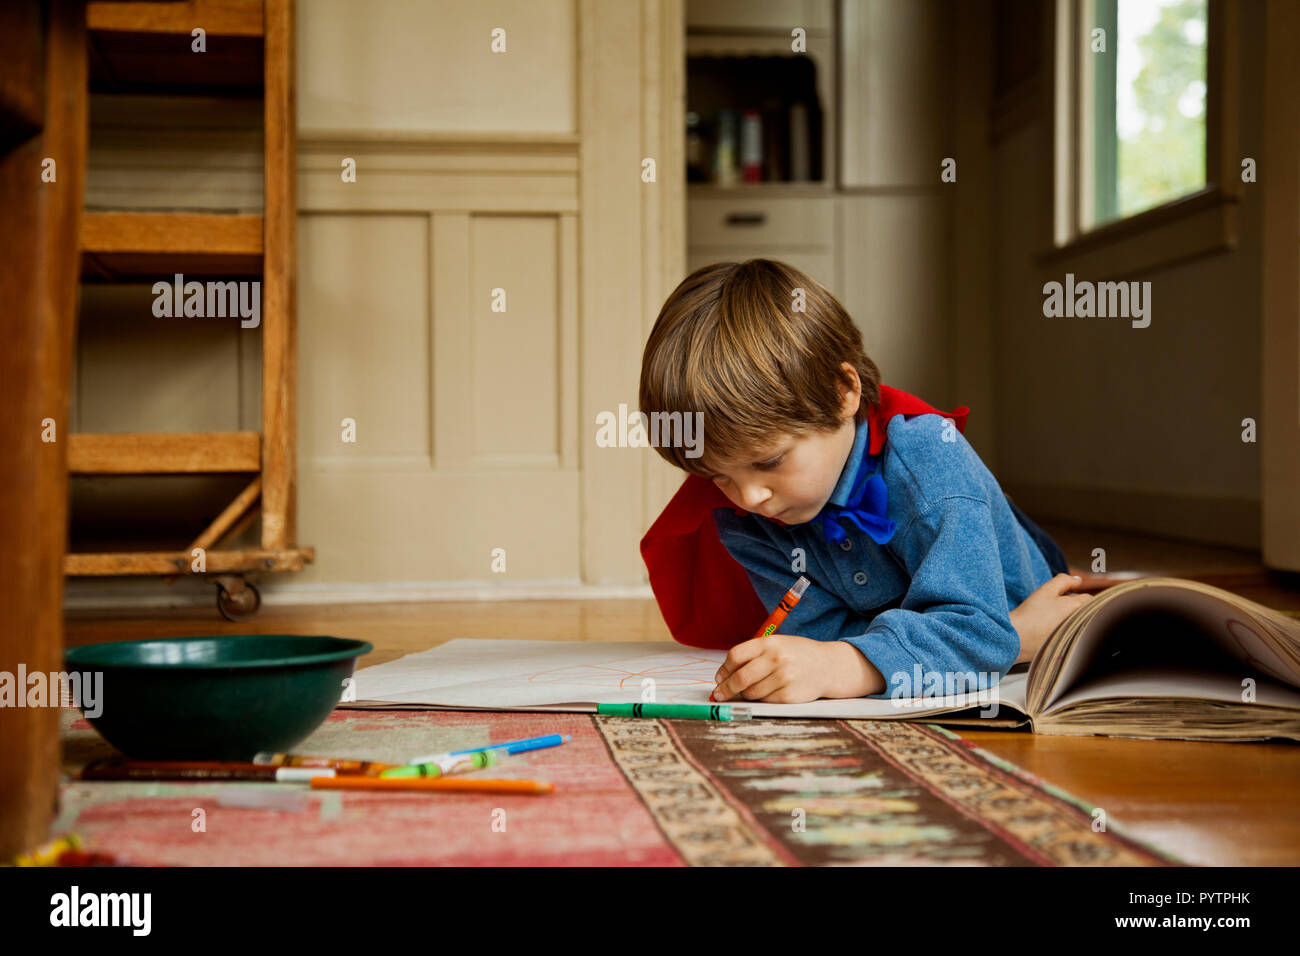 Young boy intently coloring in with crayons. Stock Photo